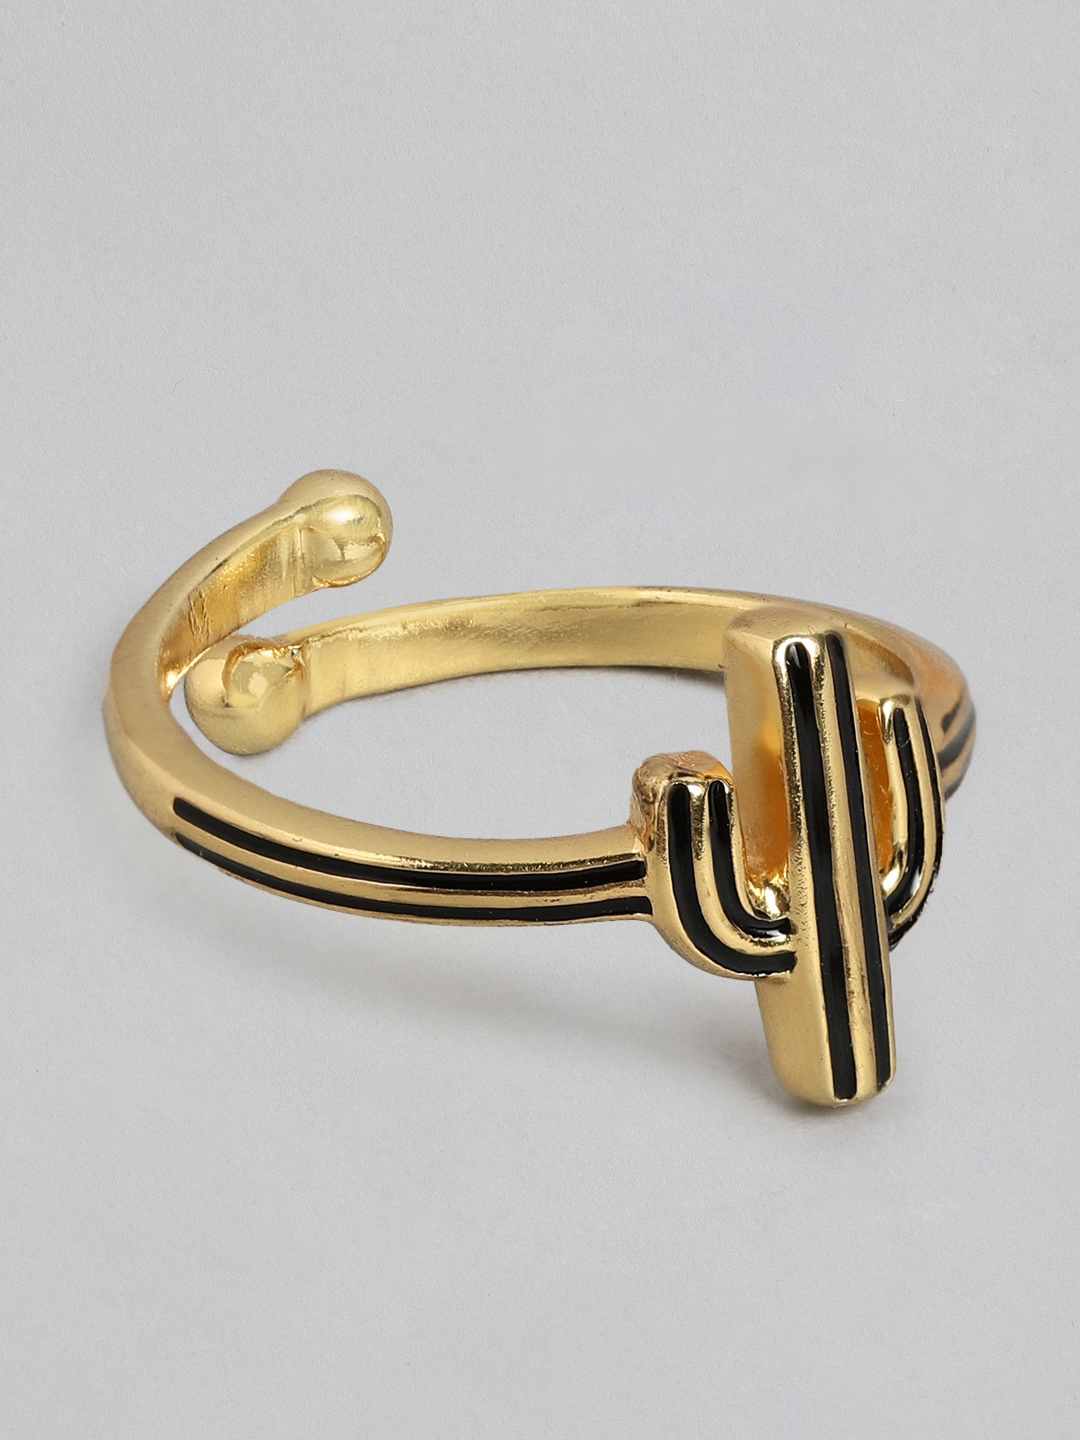 Carlton London Gold-Plated & Black Adjustable Ring Price in India